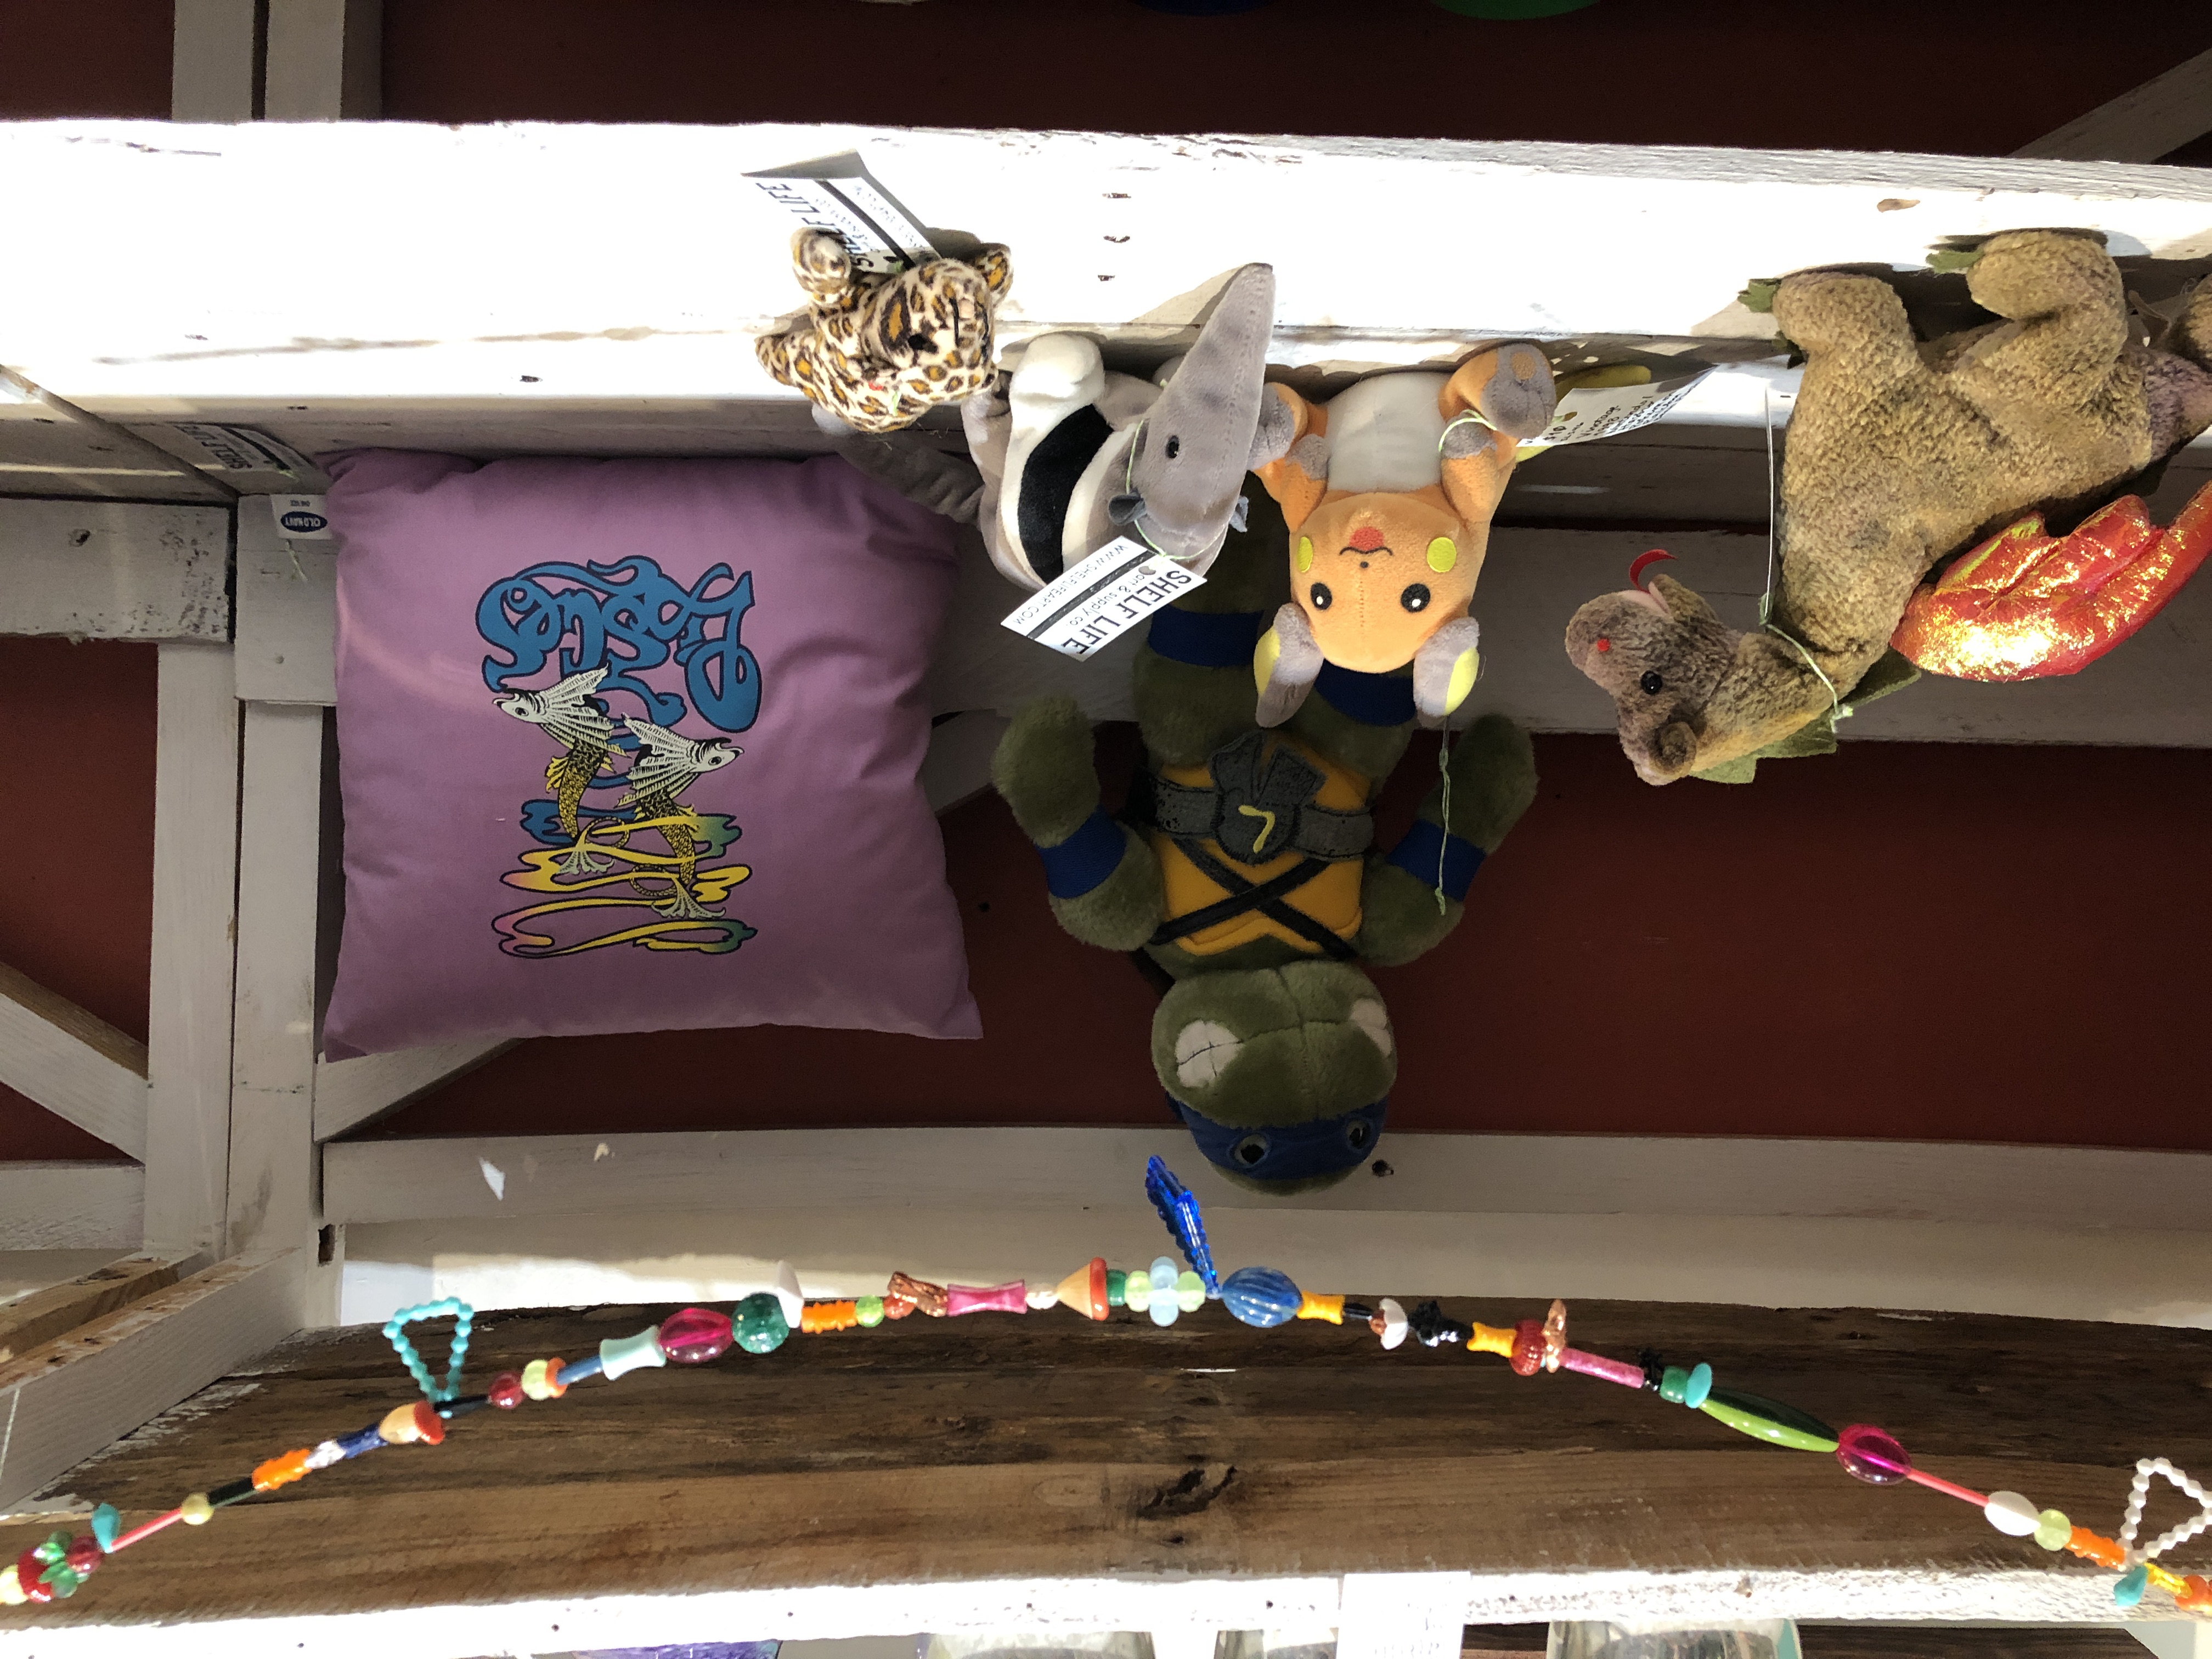 Vintage 1990s and Early 2000s plush items including Beanie Babies, McDonald's Teenie Beanie Babies, Teenage Mutant Ninja Turtles, Pokemon, and an Old Navy Pisces Zodiac throw pillow in Shelf Life Satellite at Design Archives Greensboro, NC.